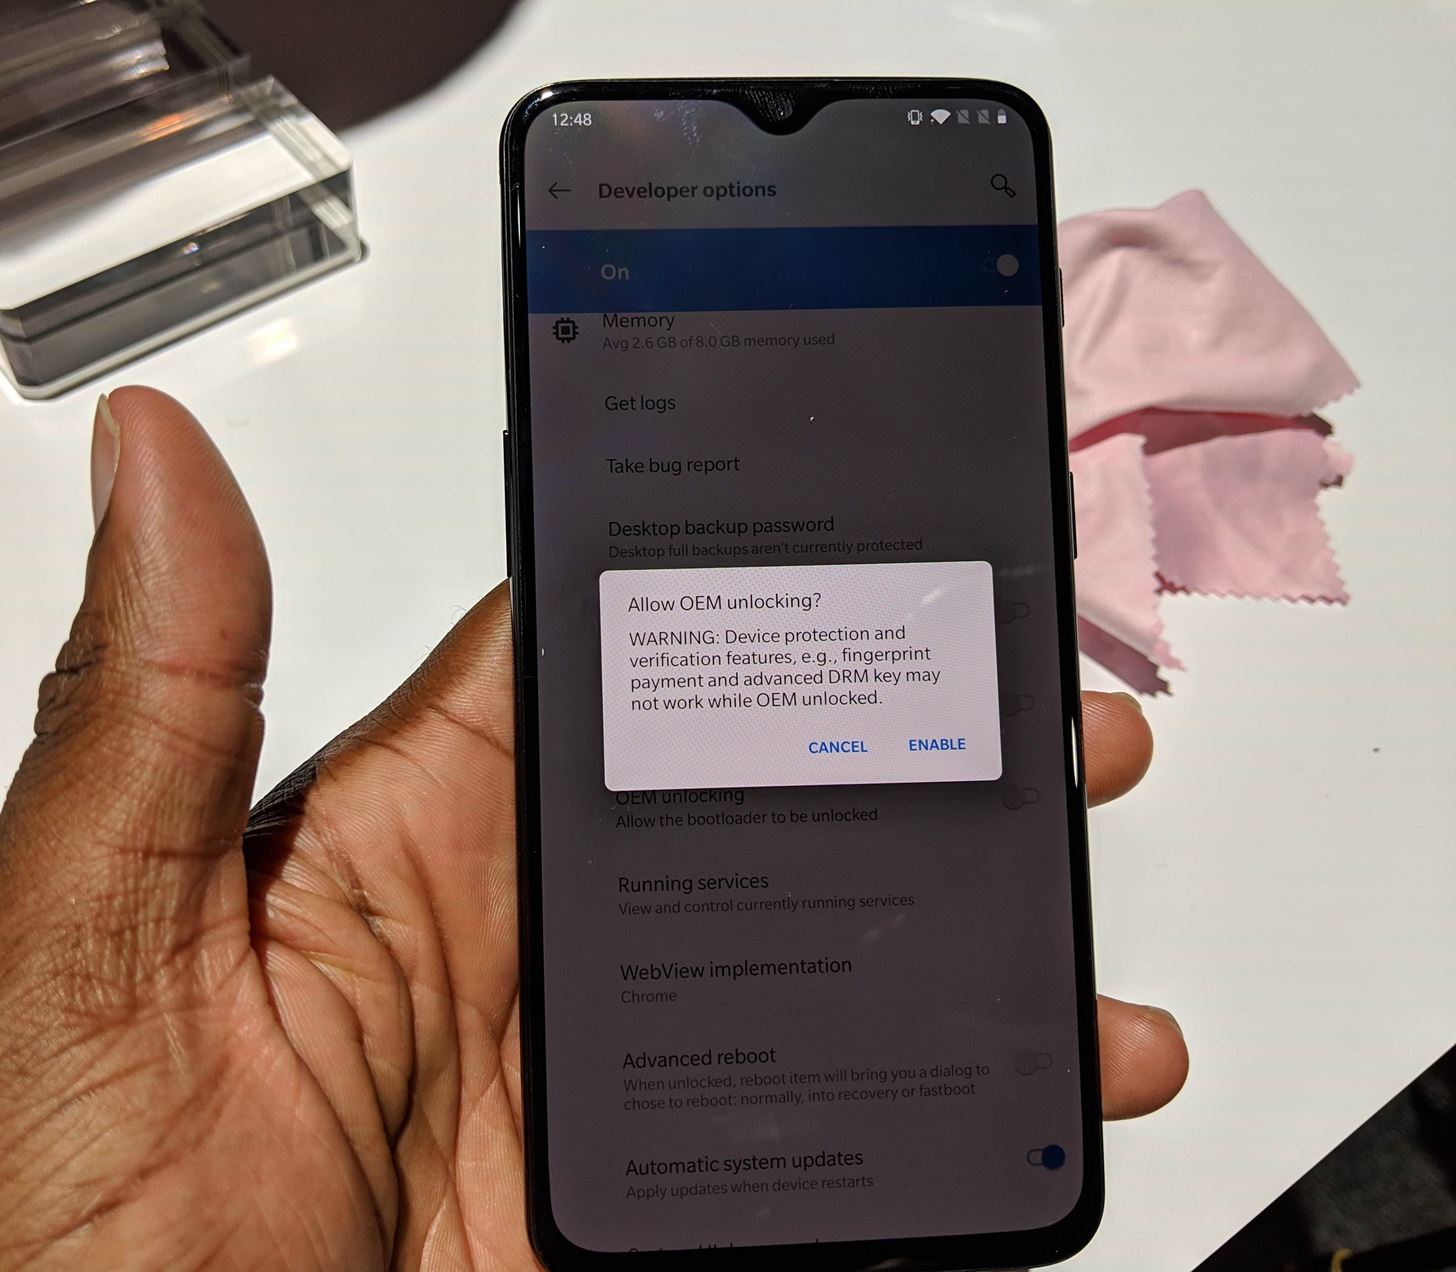 PSA: Don't Buy the T-Mobile OnePlus 6T if You Want to Root